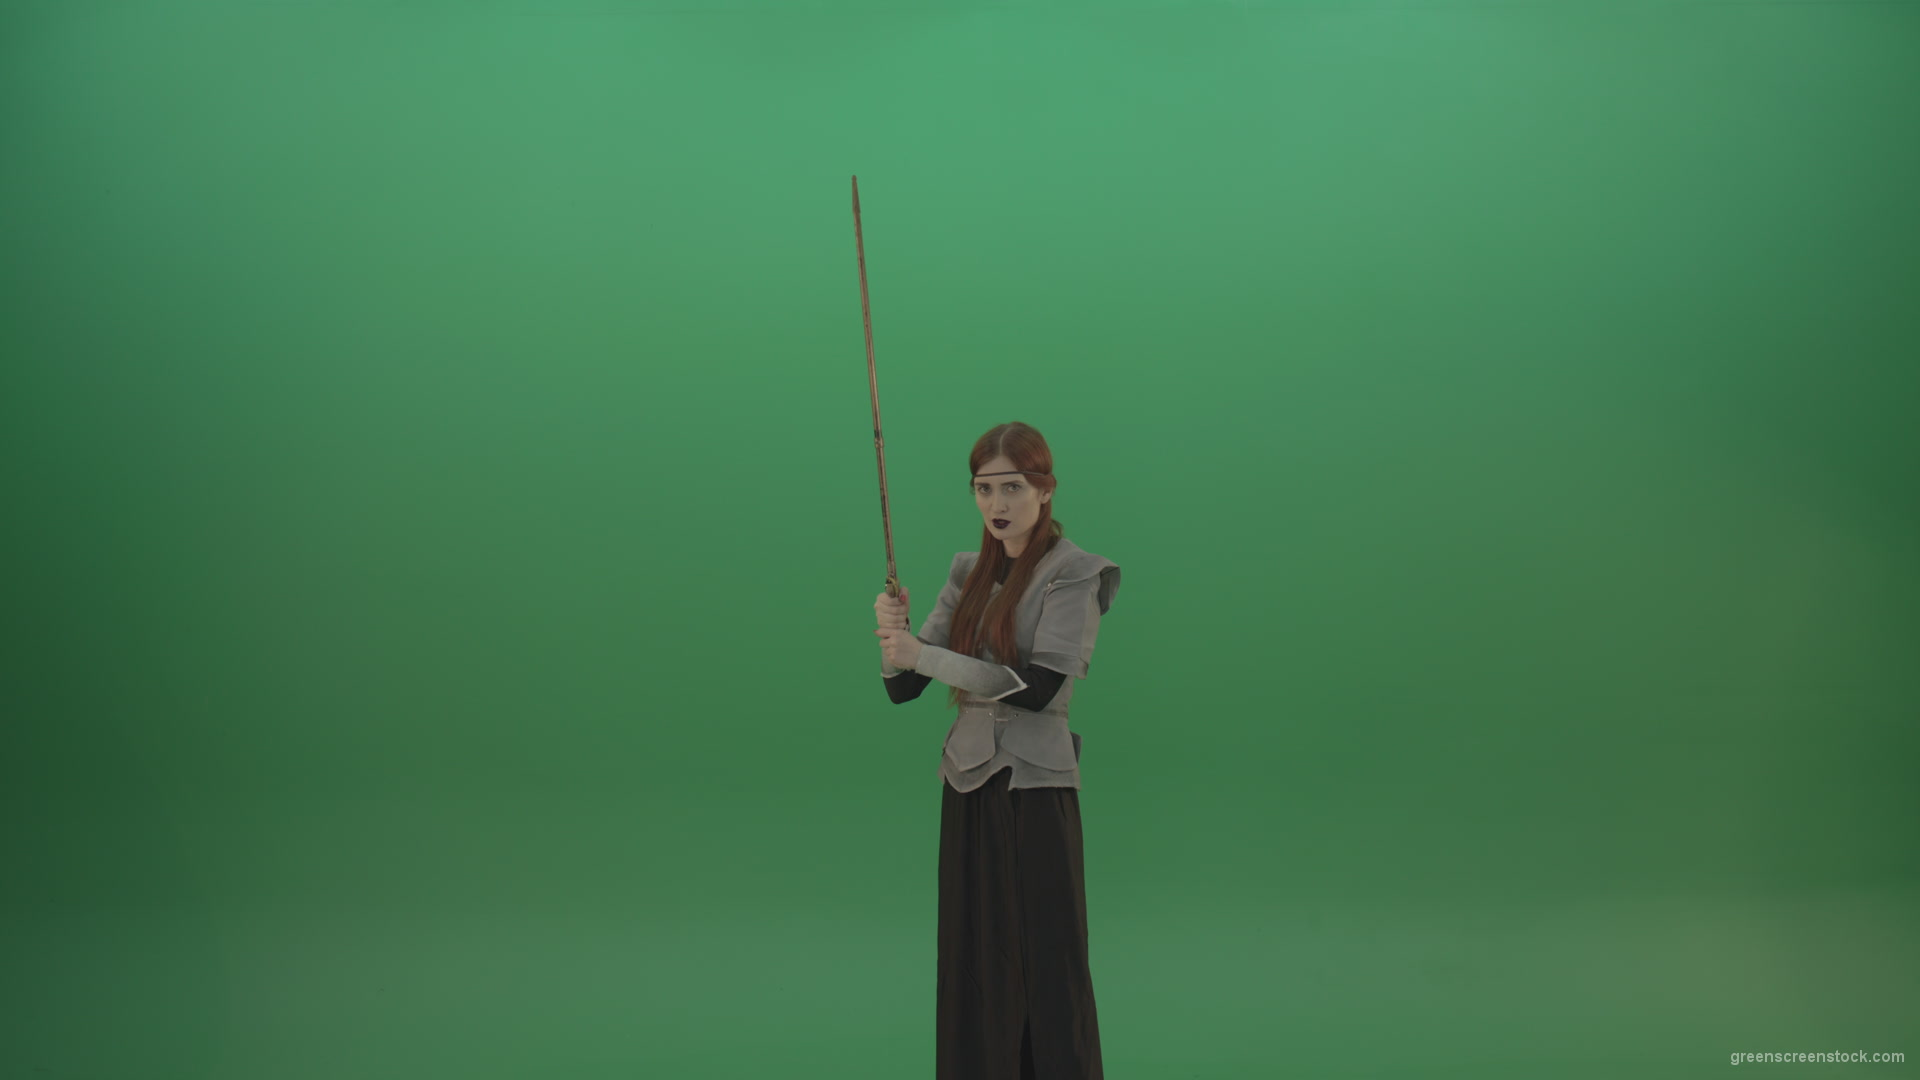 Girl-shouts-her-foes-on-an-offensive-raising-a-sword-up-on-a-green-background_002 Green Screen Stock